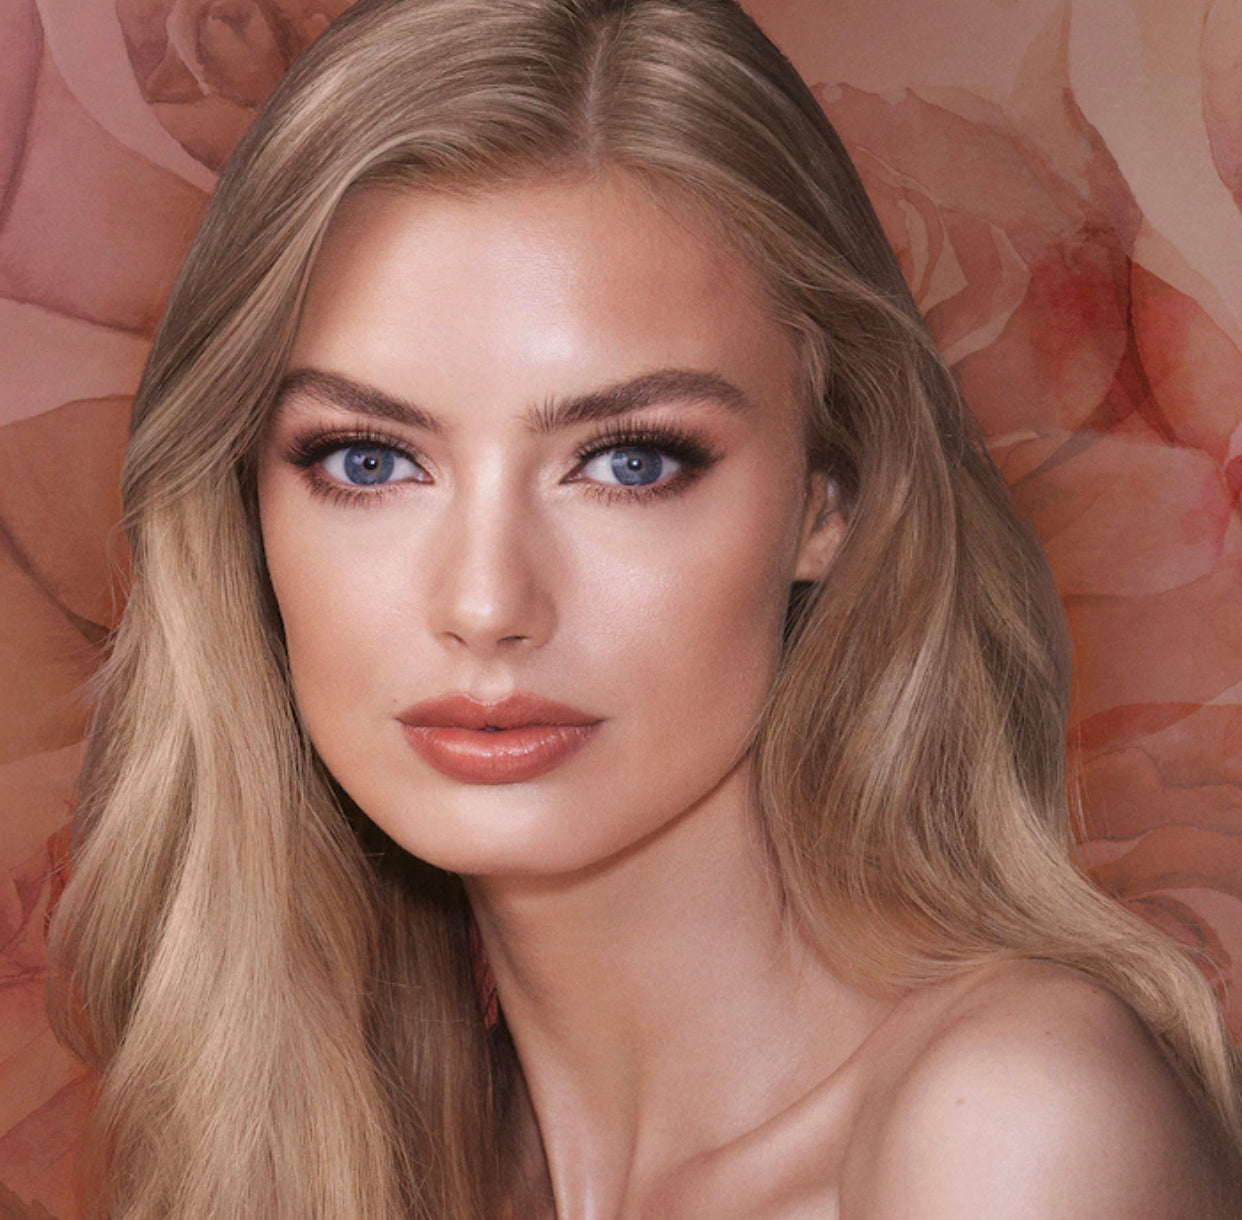 CHARLOTTE TILBURY, INSTANT LOOK IN A PALETTE STONE ROSE